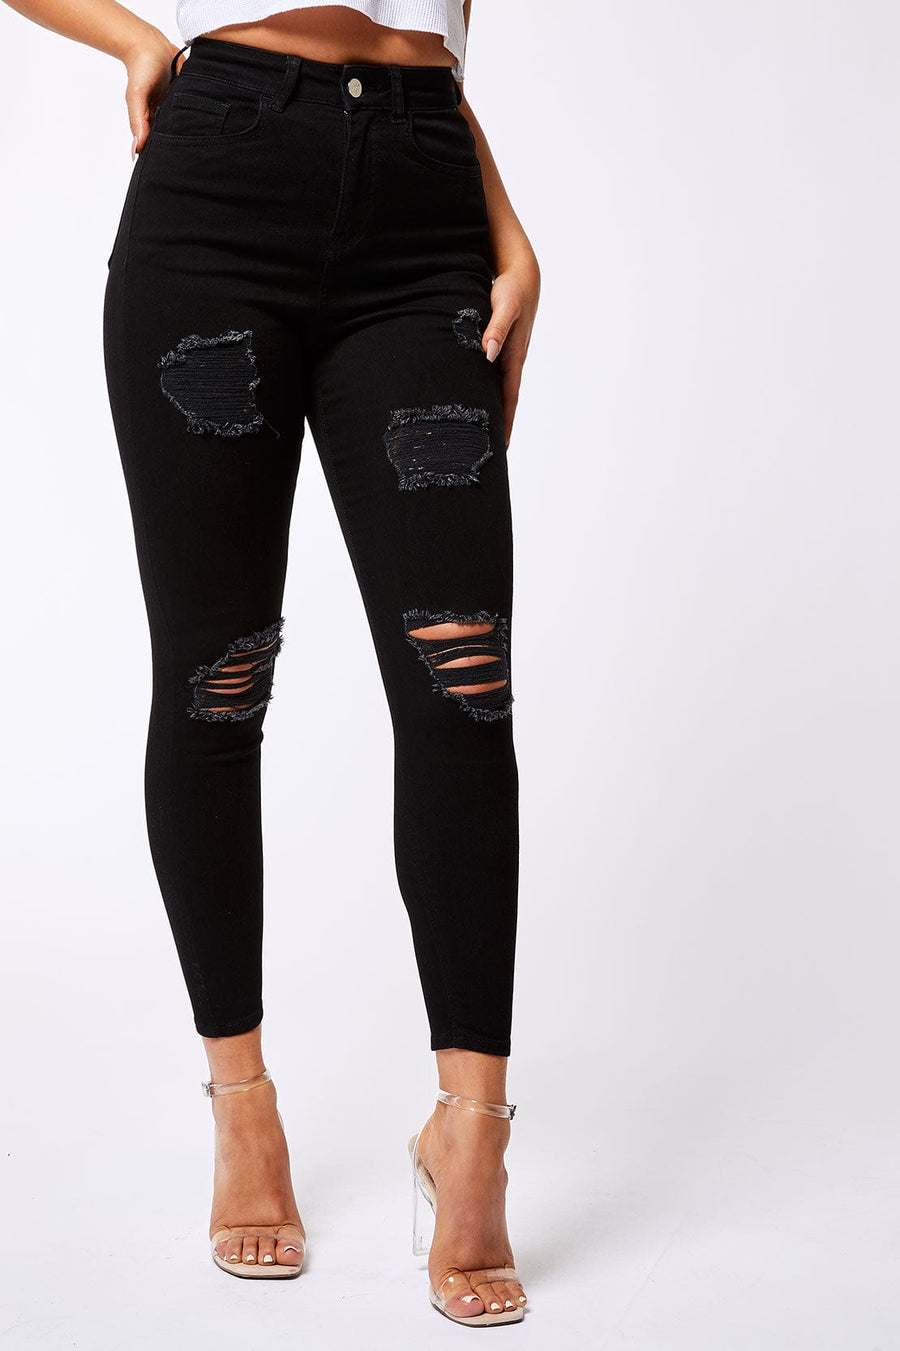 Legend London Women's Jeans SKINNY JEANS RIPPED & REPAIRED - BLACK